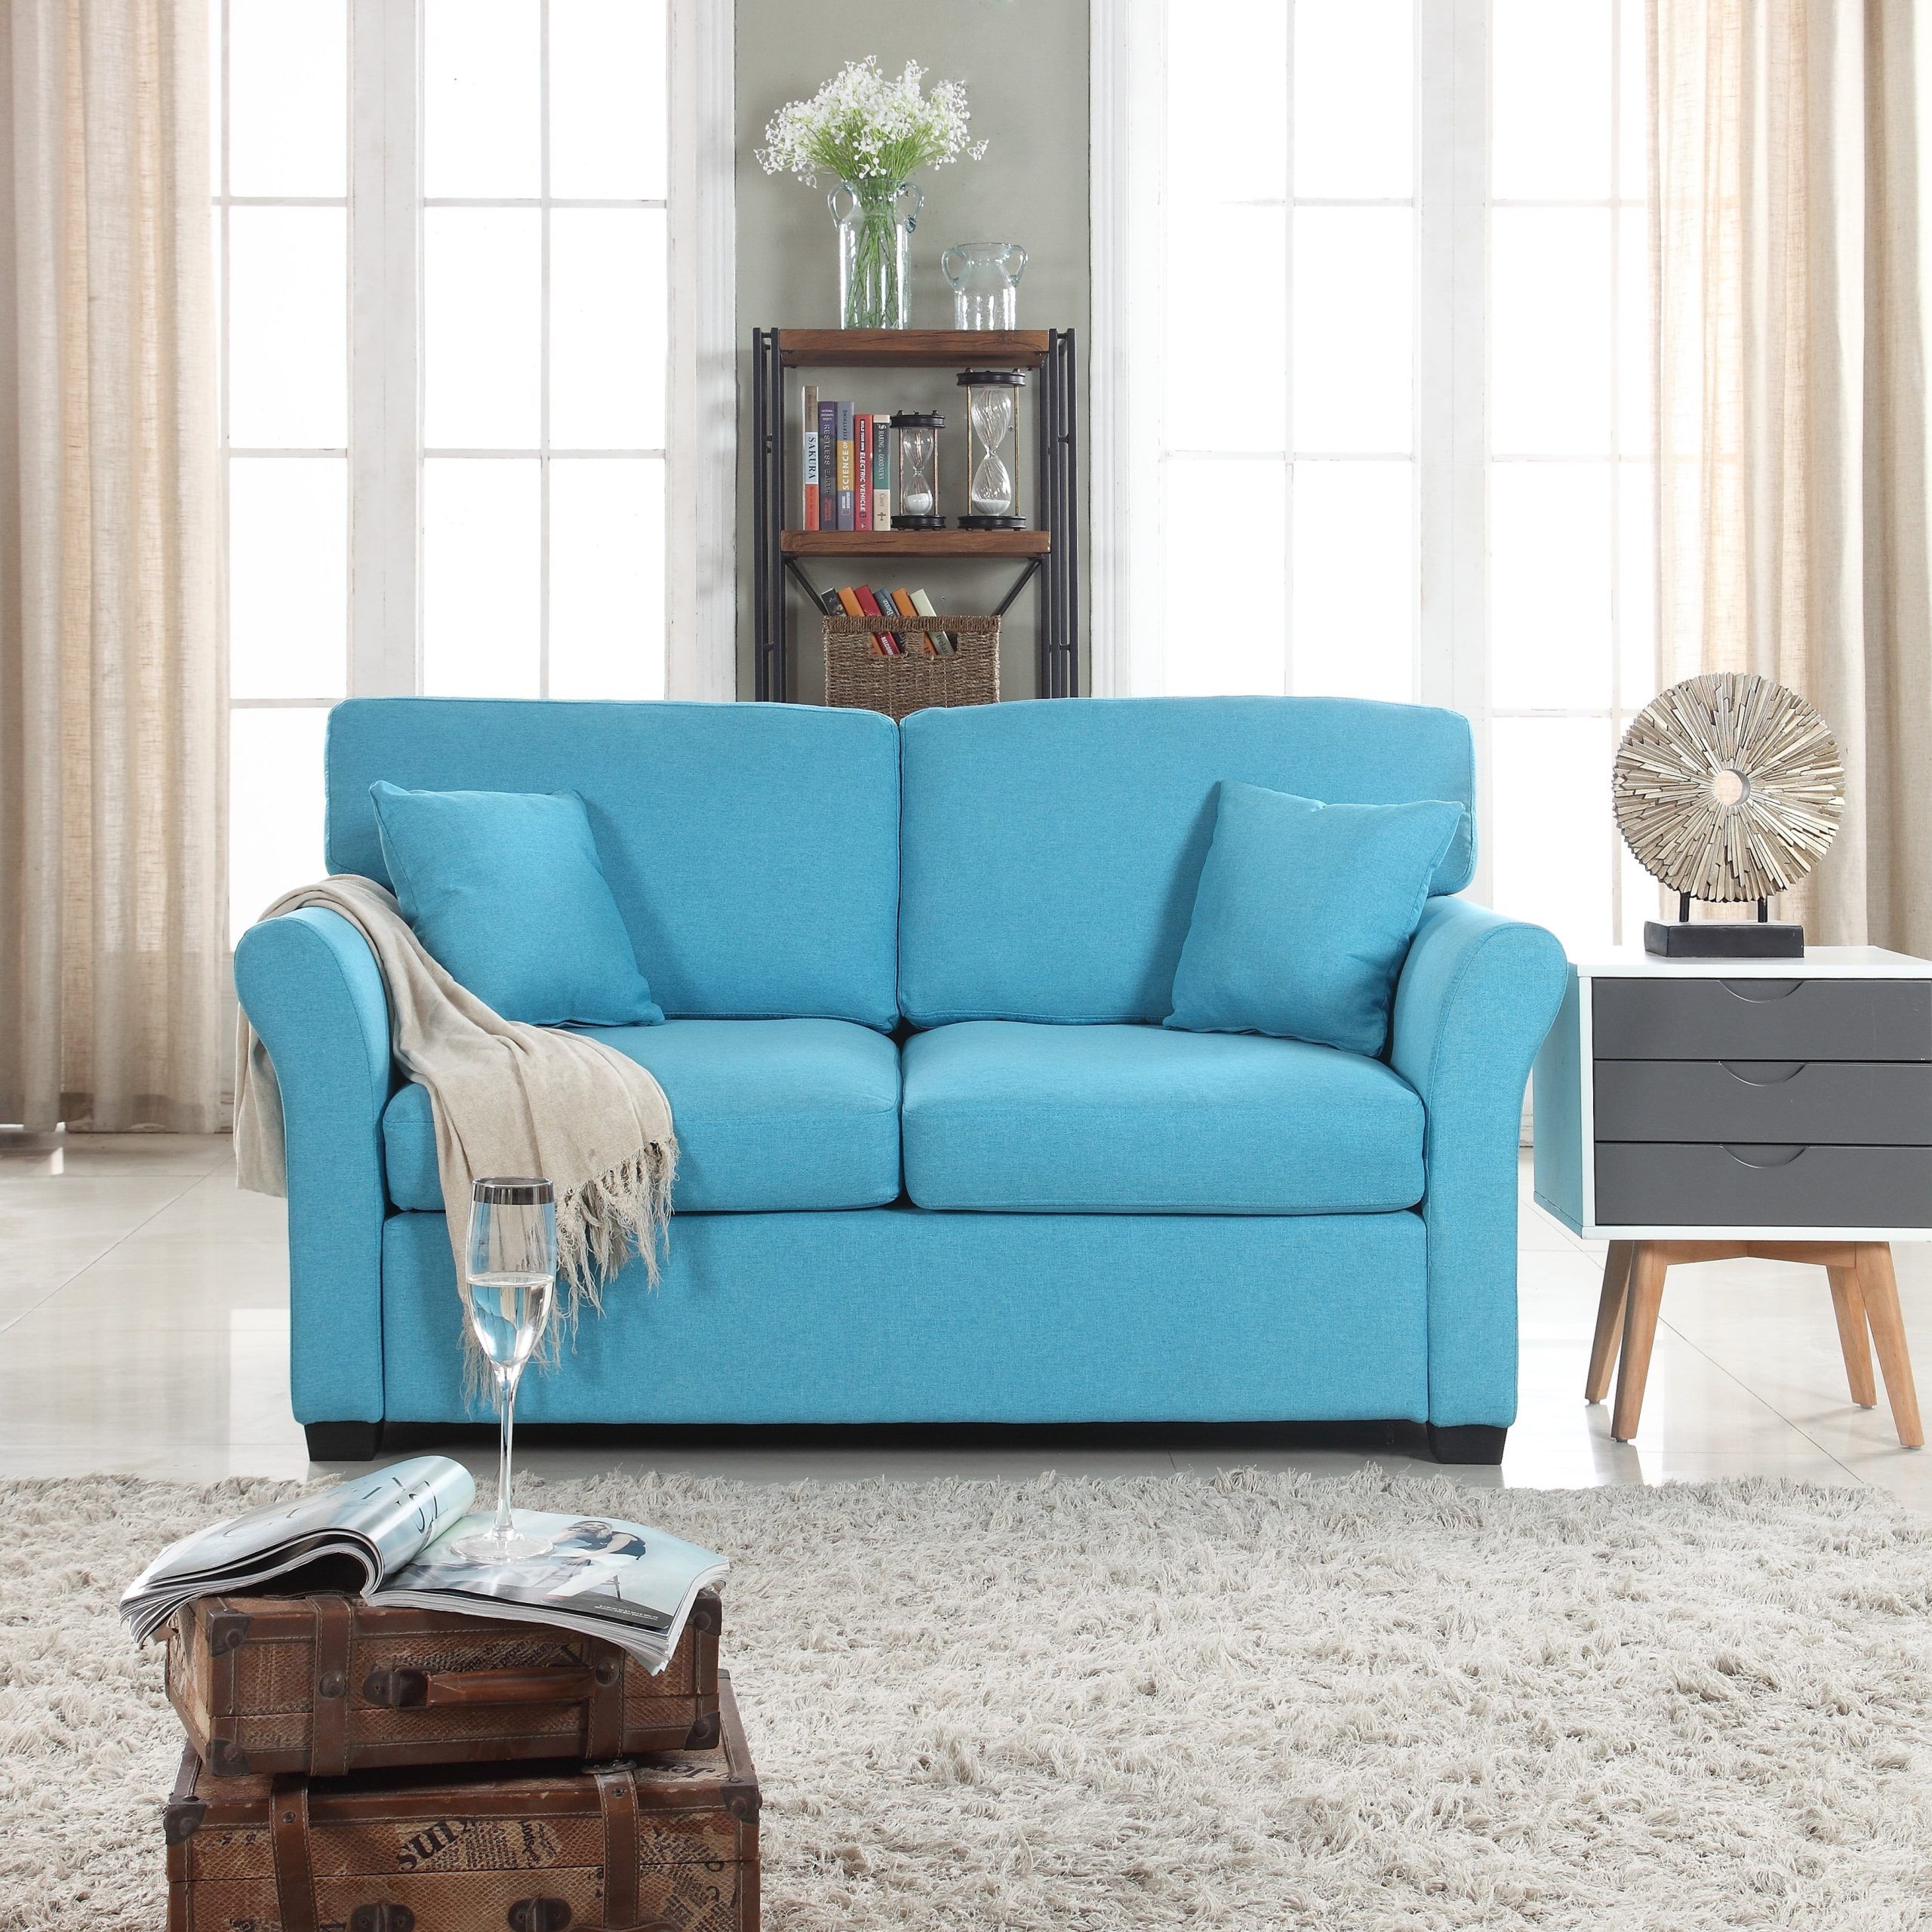 Classic And Traditional Comfortable Linen Fabric Loveseat Sofa Living With Regard To Modern Blue Linen Sofas (Gallery 10 of 20)